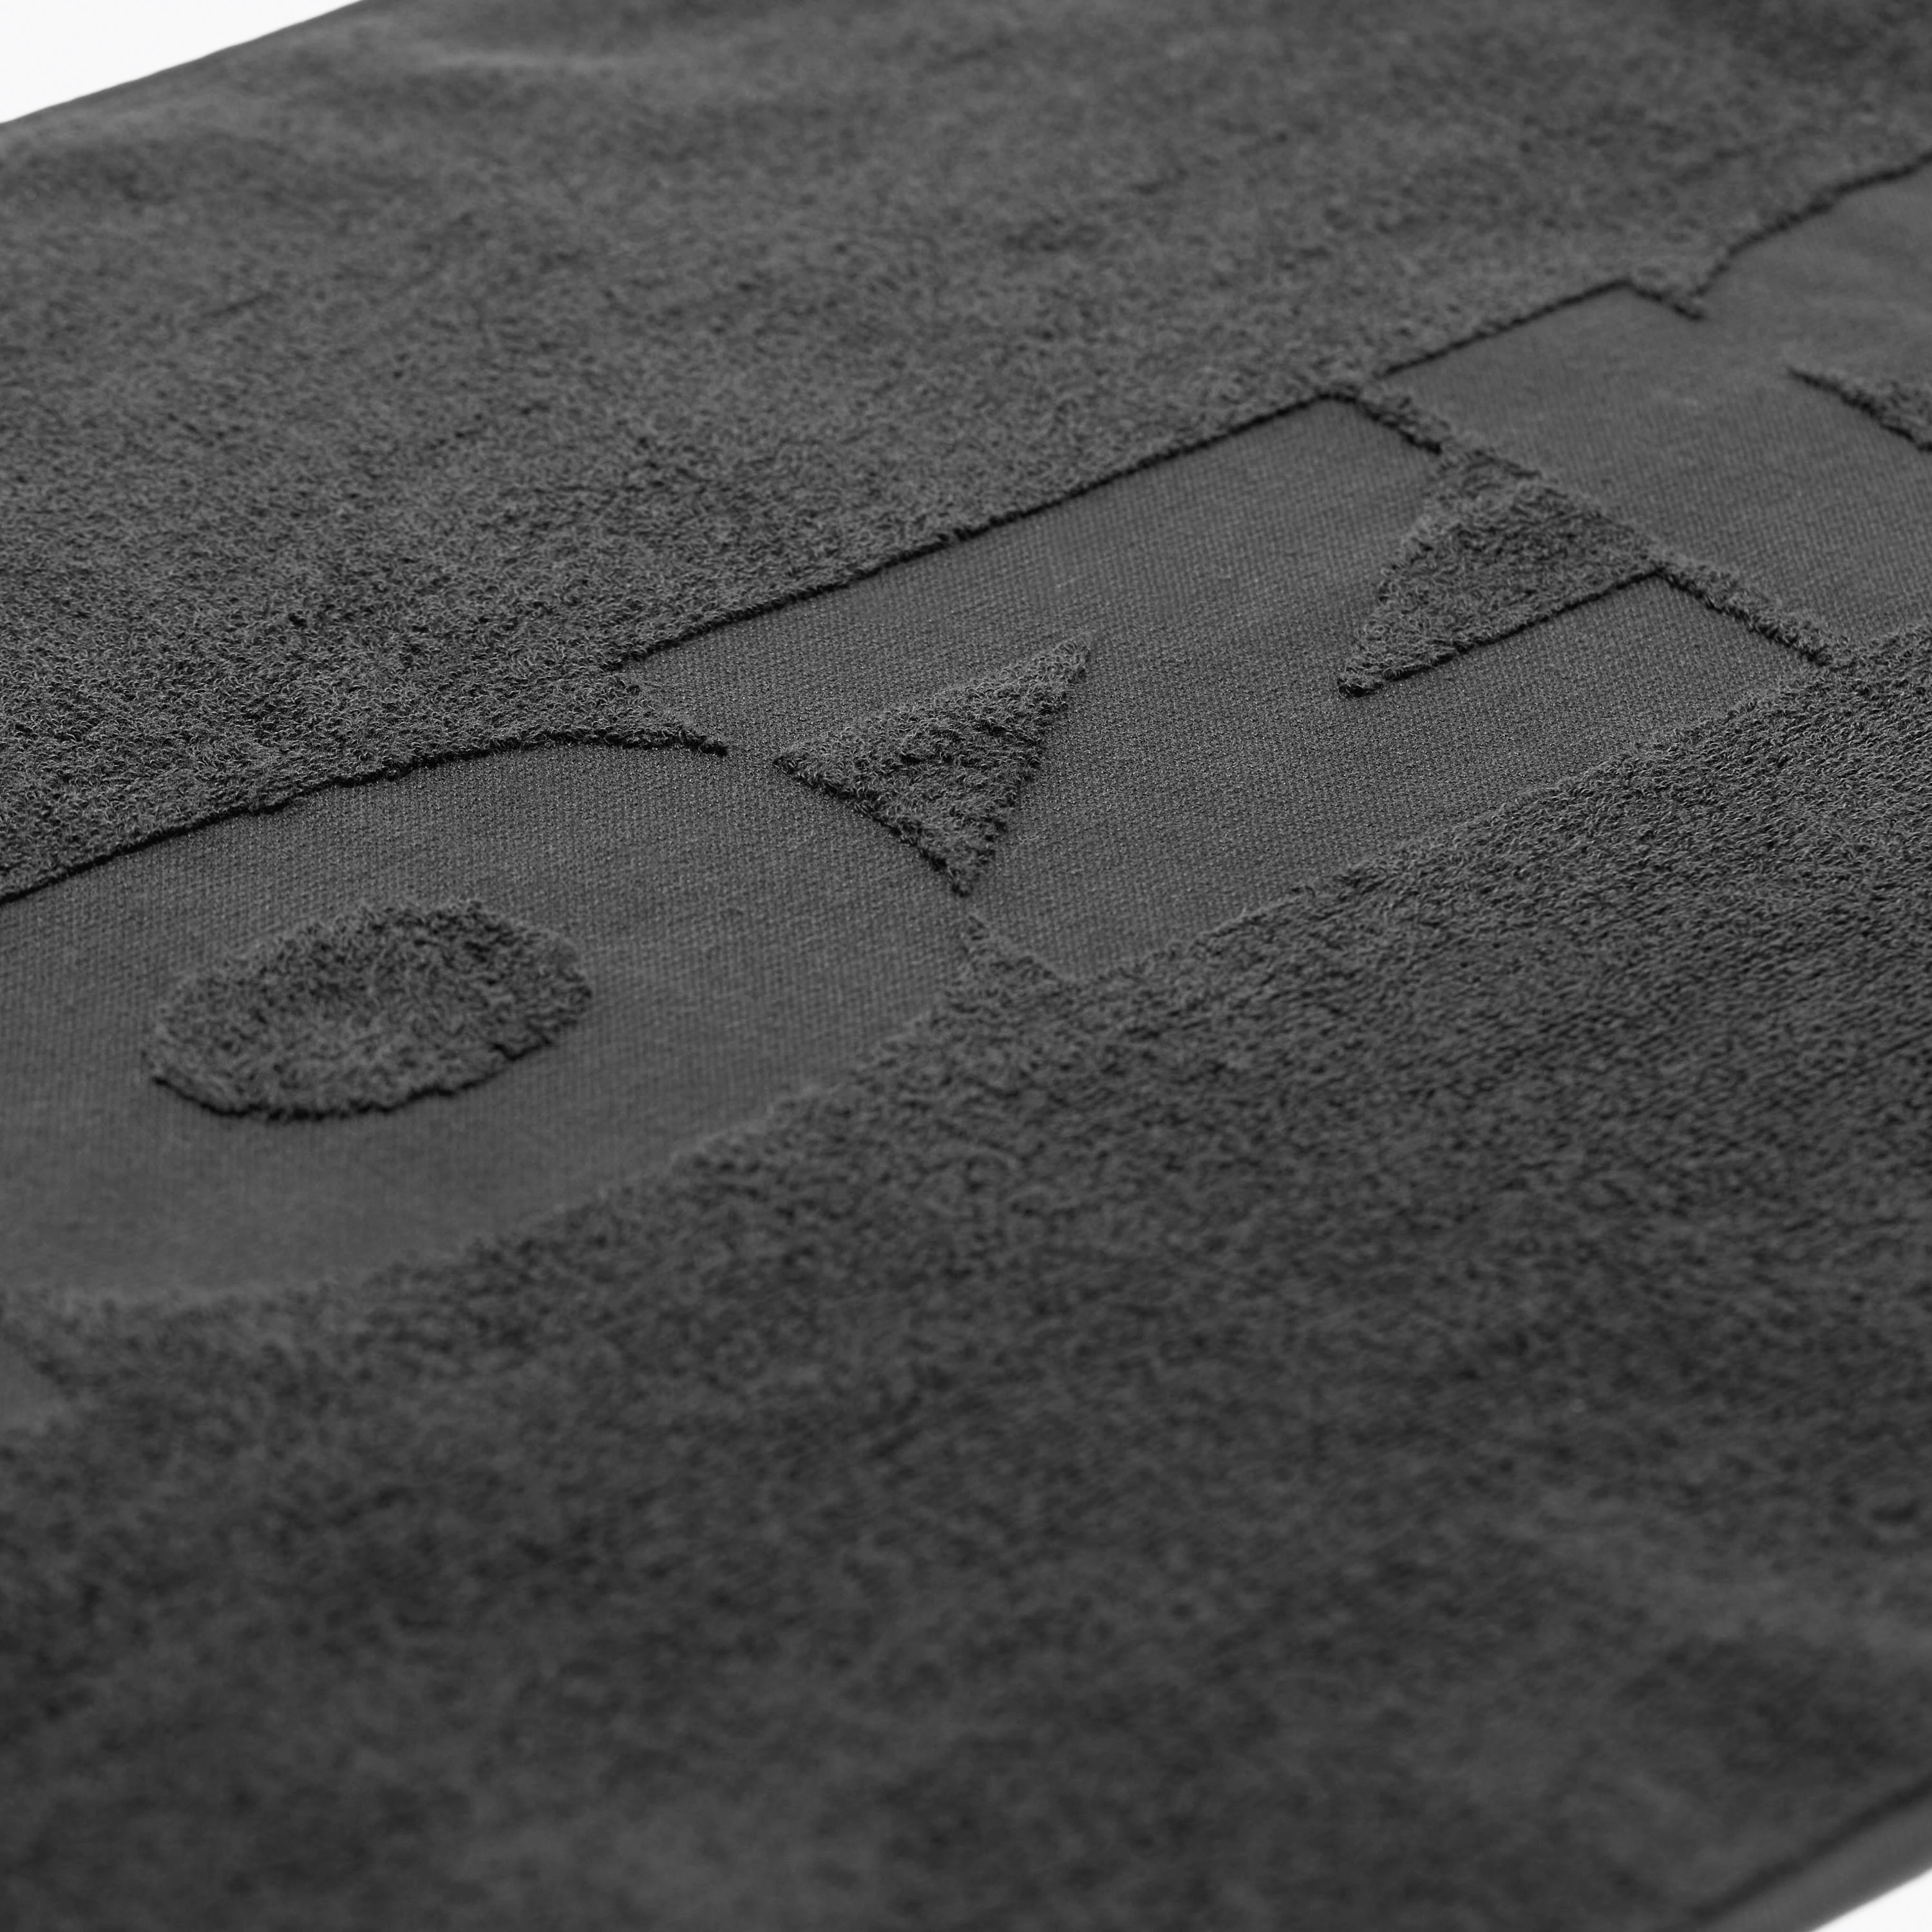 100% cotton jacquard bath towel customized woven embossed logo beach towel for pool sports gym